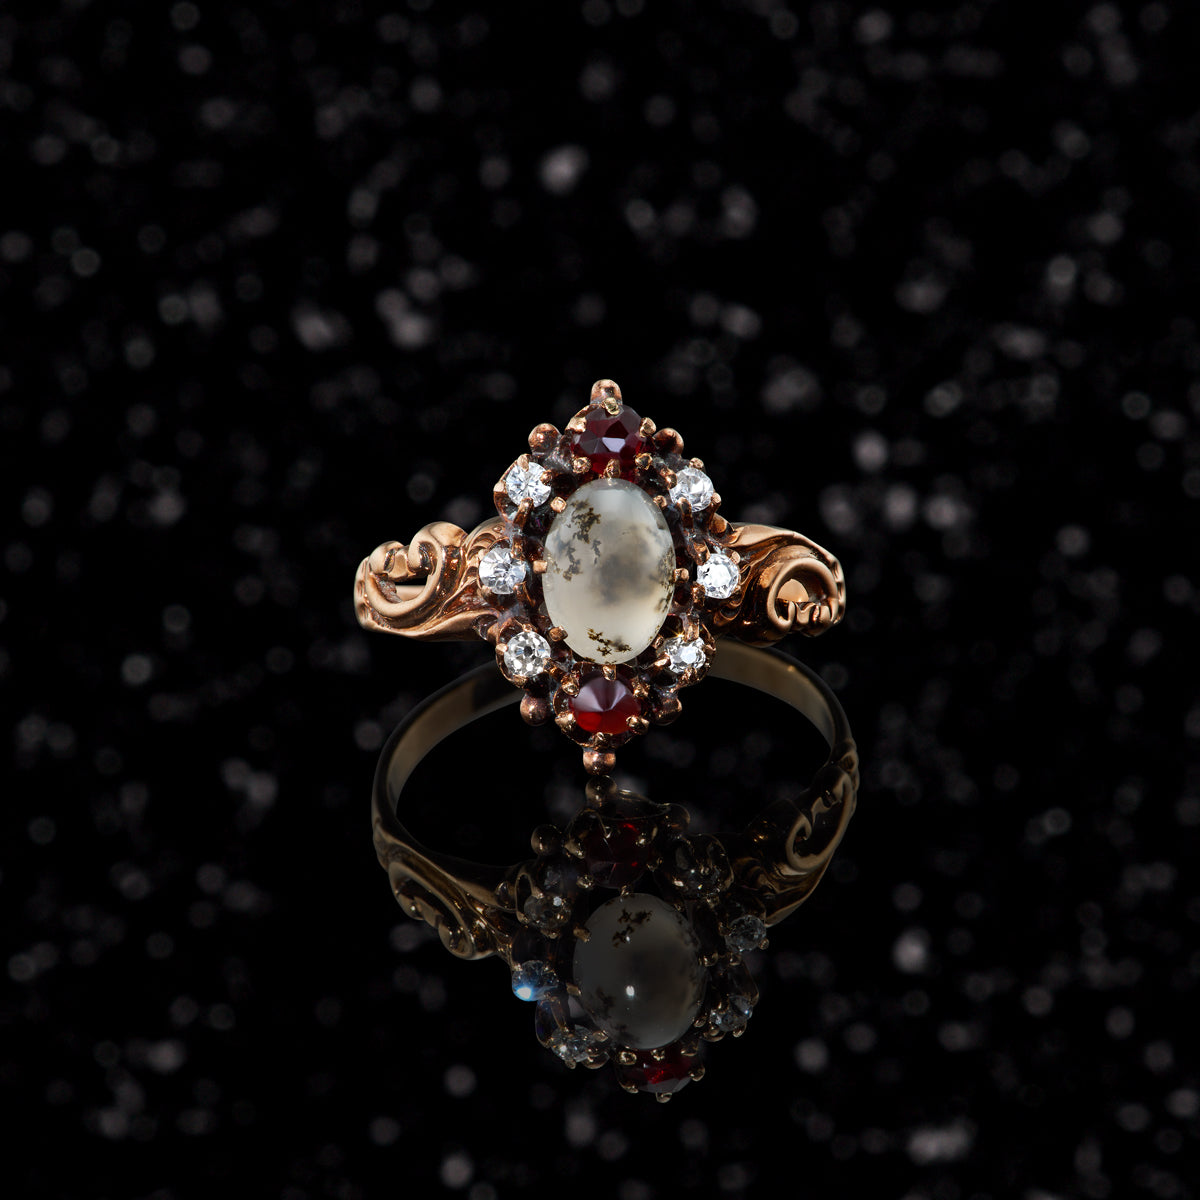 THE MOSSY WOODS RING